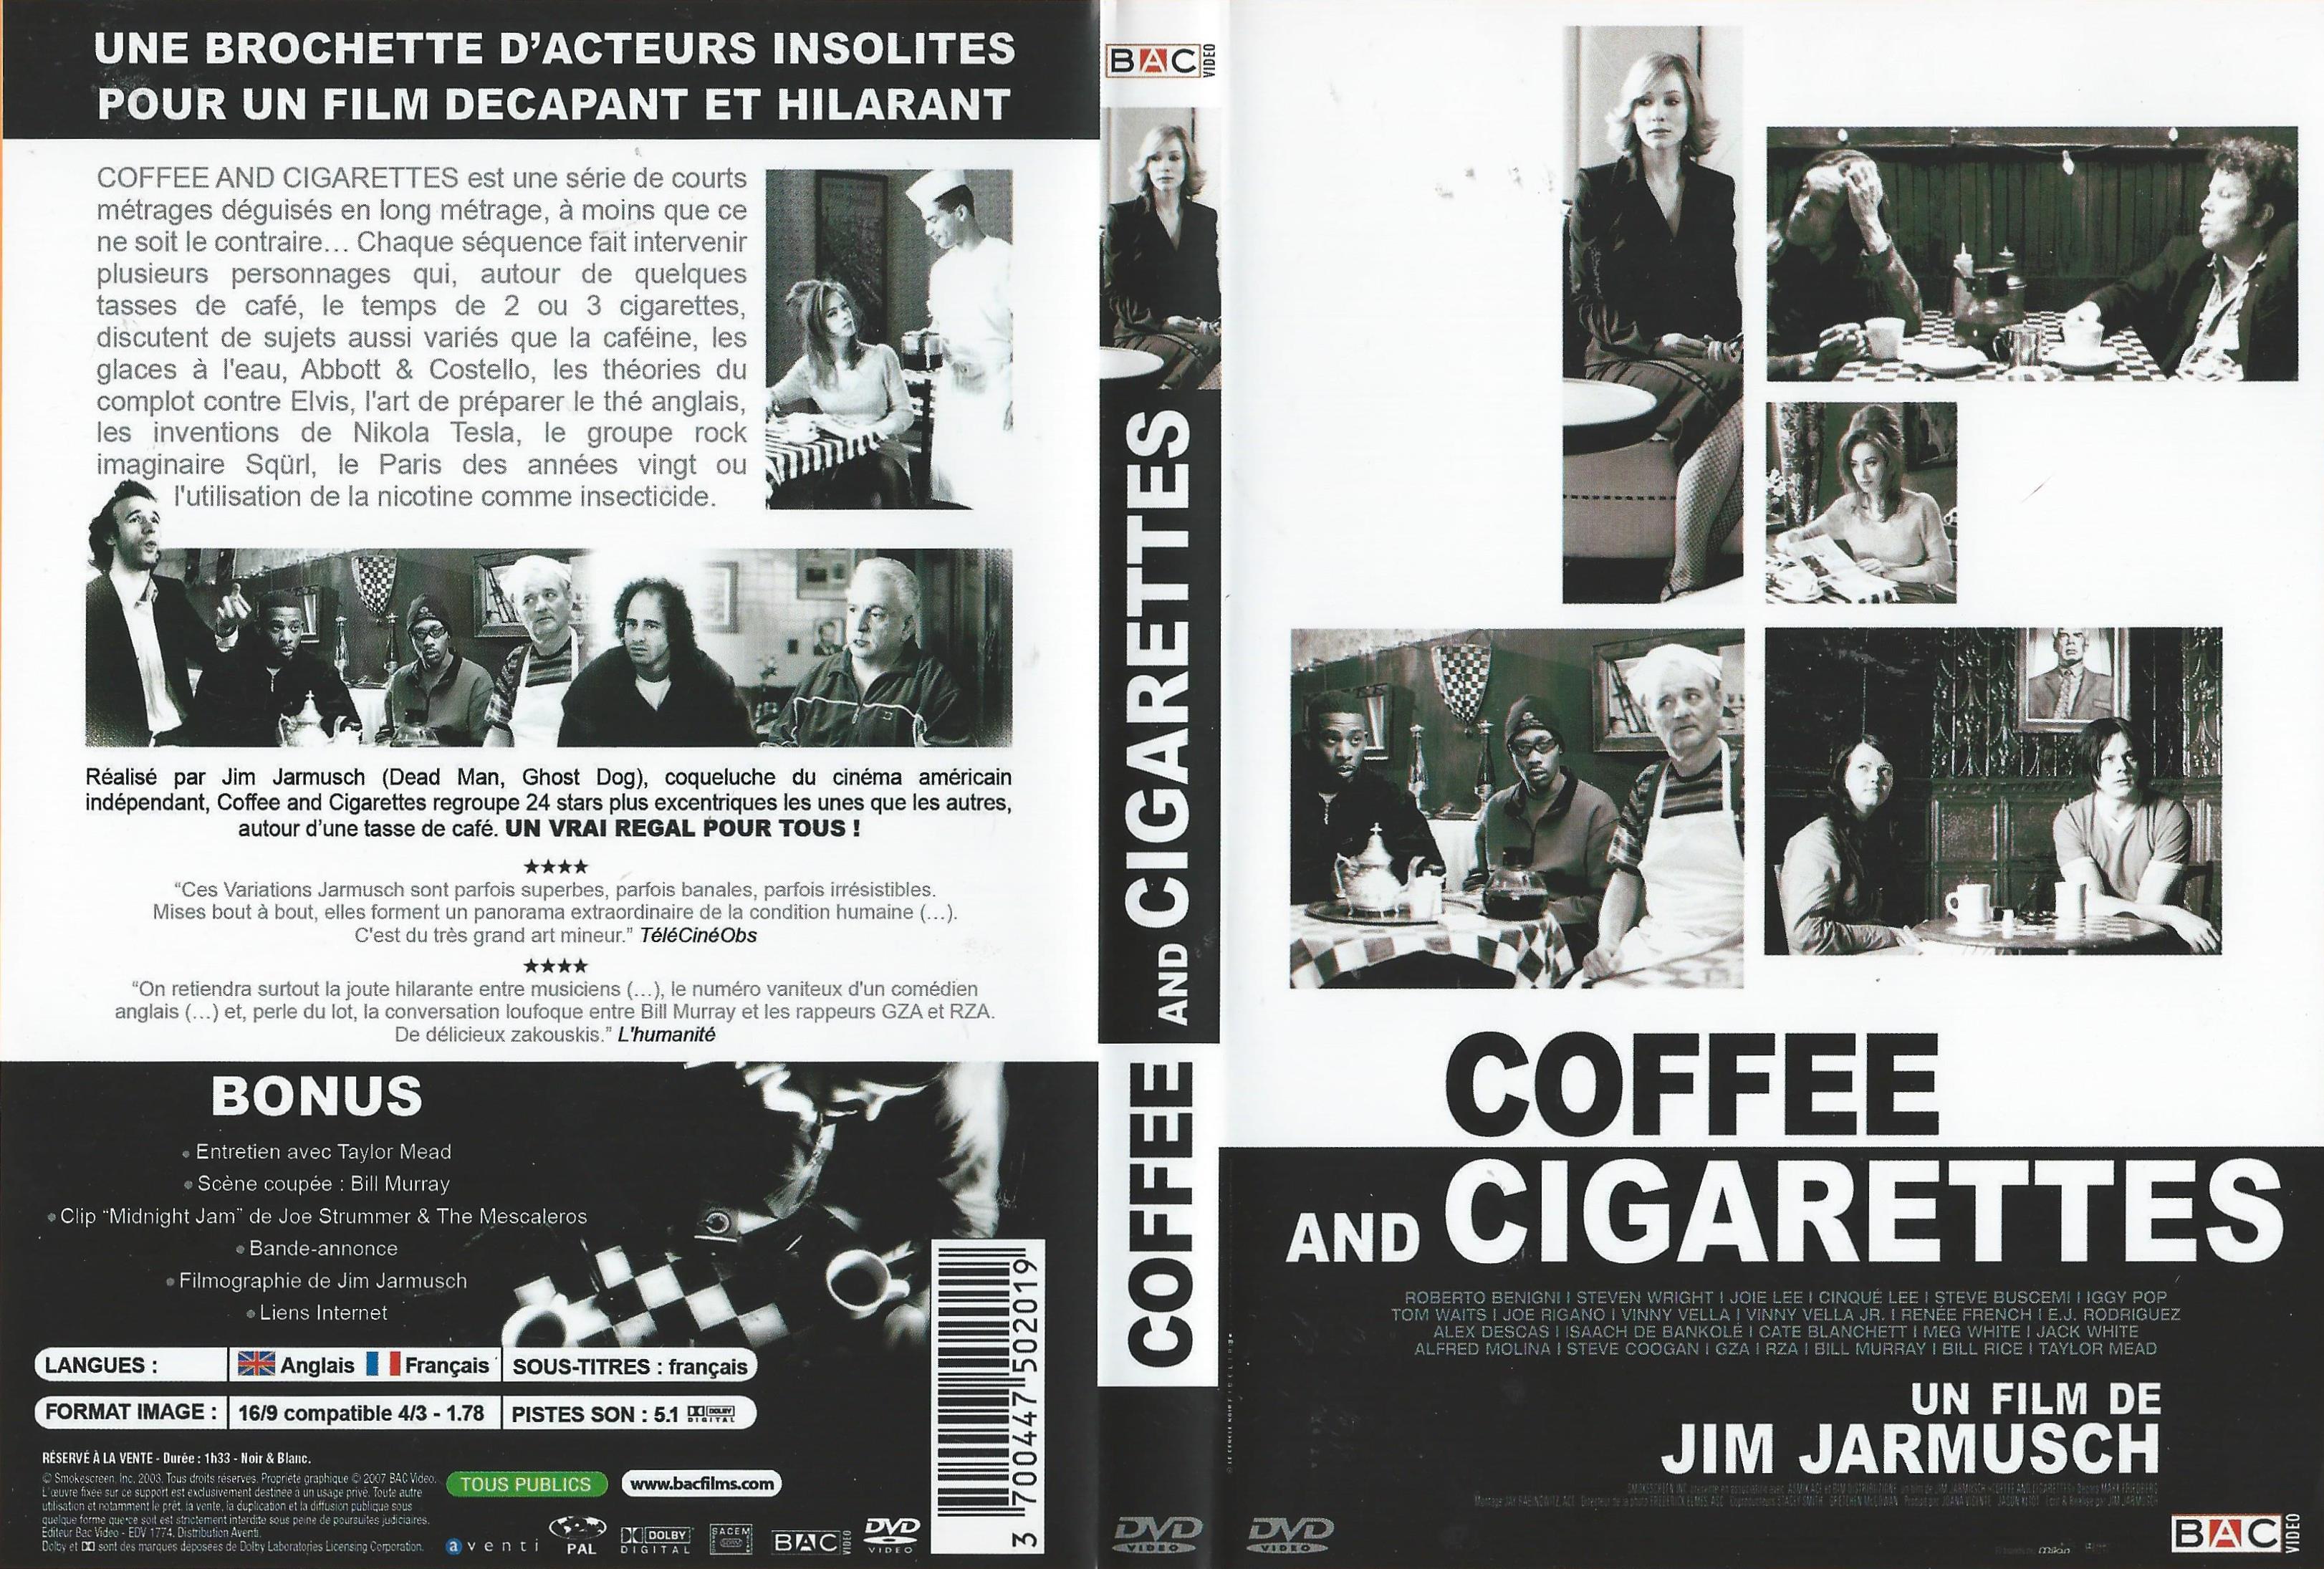 Jaquette DVD Coffee and cigarettes v3